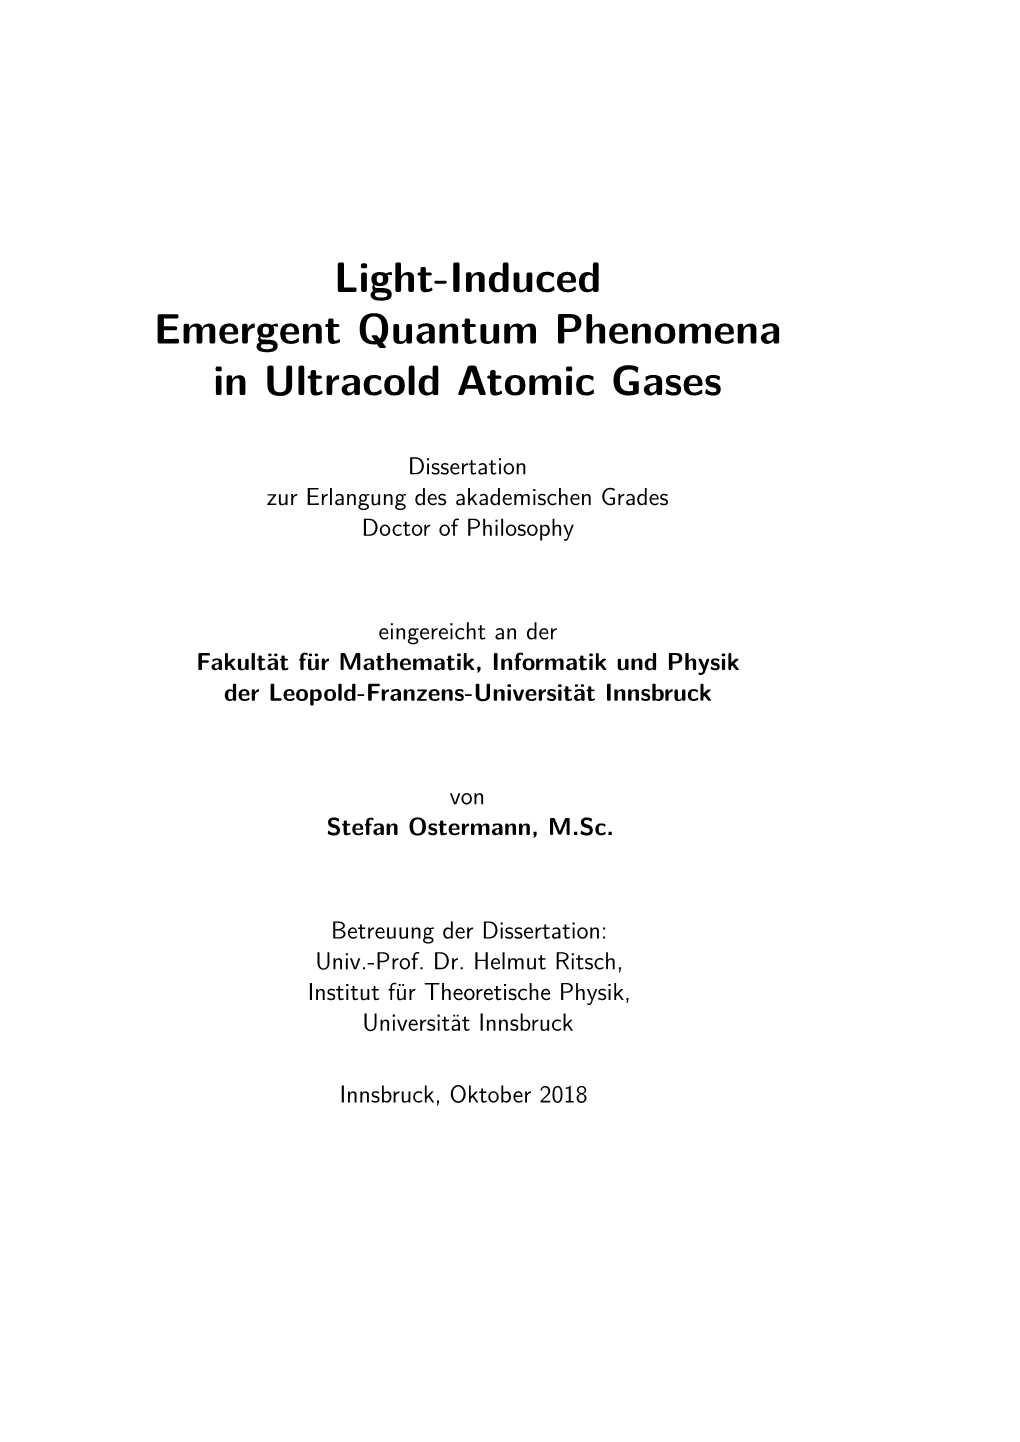 Light-Induced Emergent Quantum Phenomena in Ultracold Atomic Gases